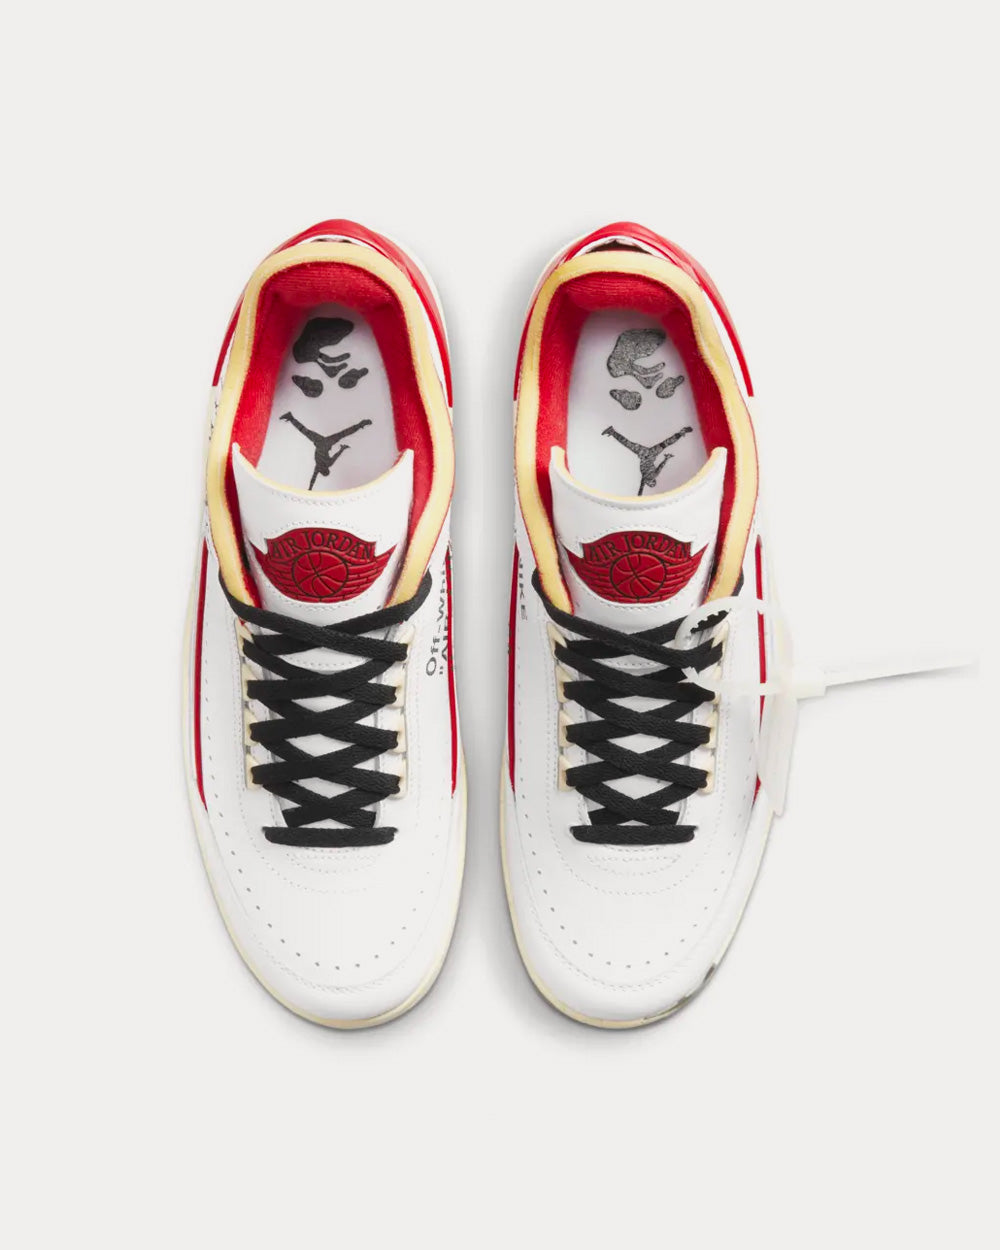 Nike x Off-White Air Jordan 2 Low White and Varsity Red Low Top 